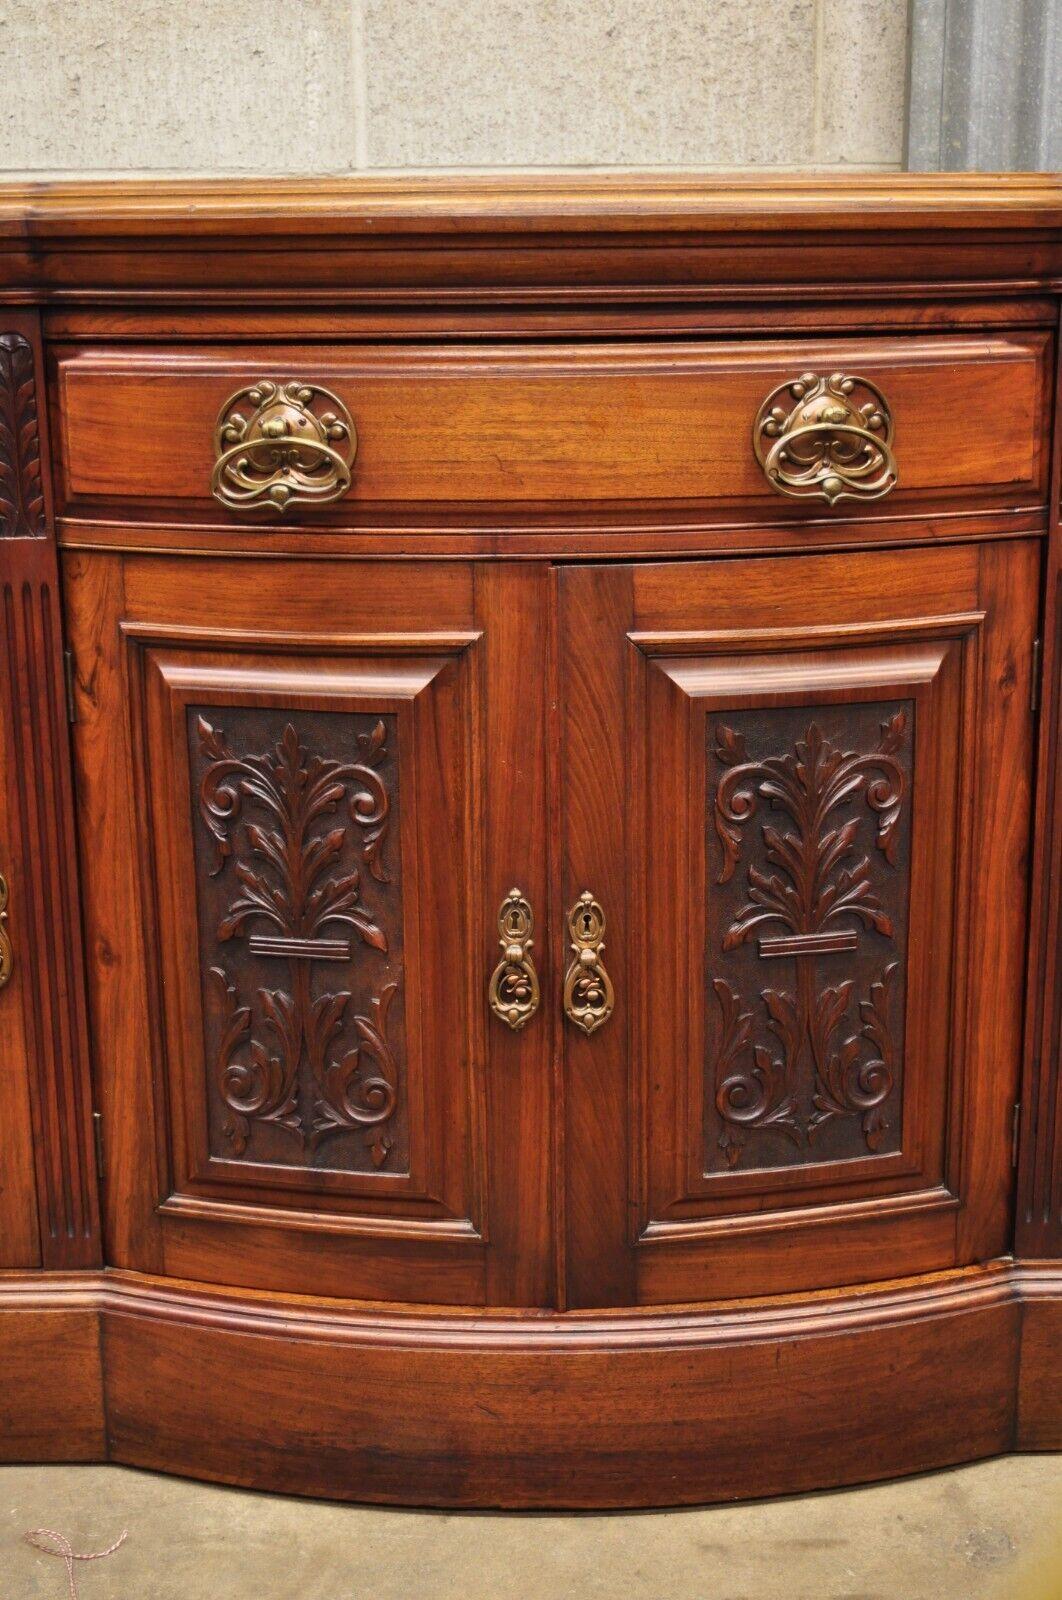 Antique French Renaissance Art Nouveau Mahogany Bowed Front Buffet Sideboard In Good Condition For Sale In Philadelphia, PA